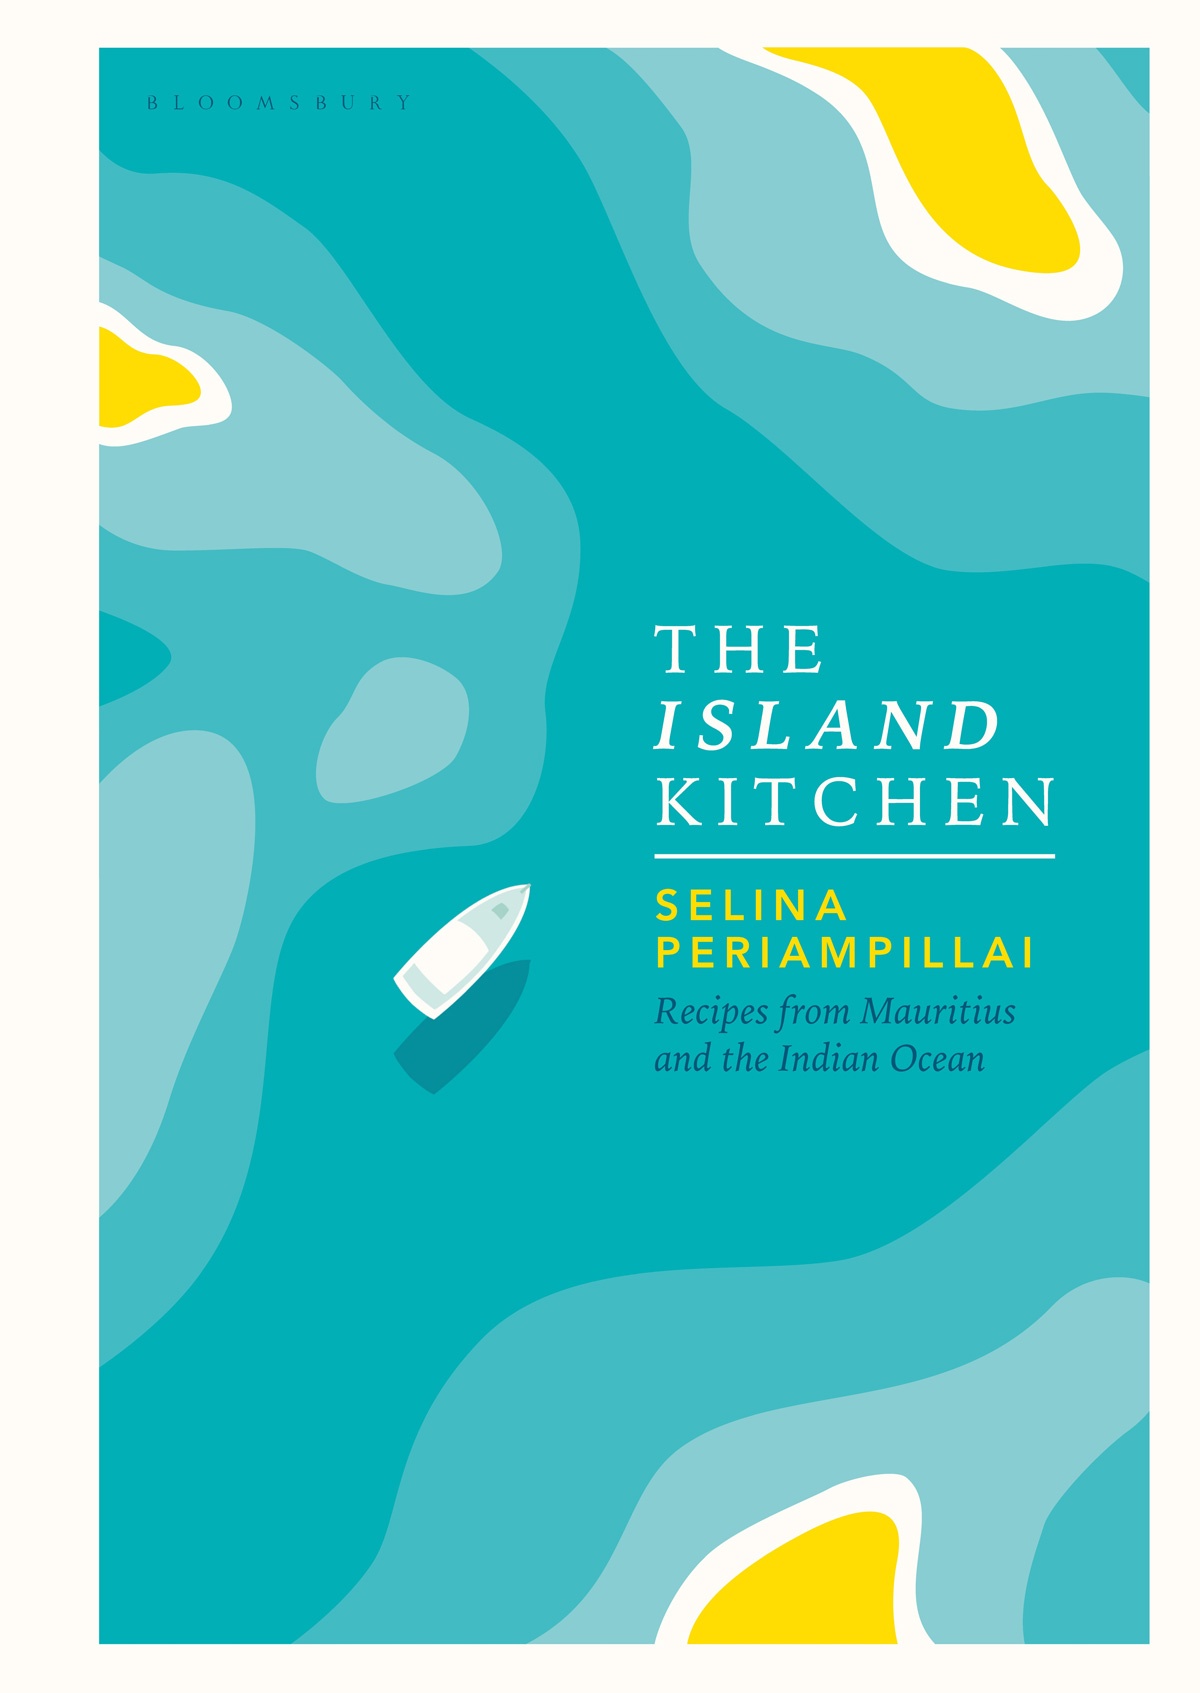 Book cover of The Island Kitchen by Selina Periampillai